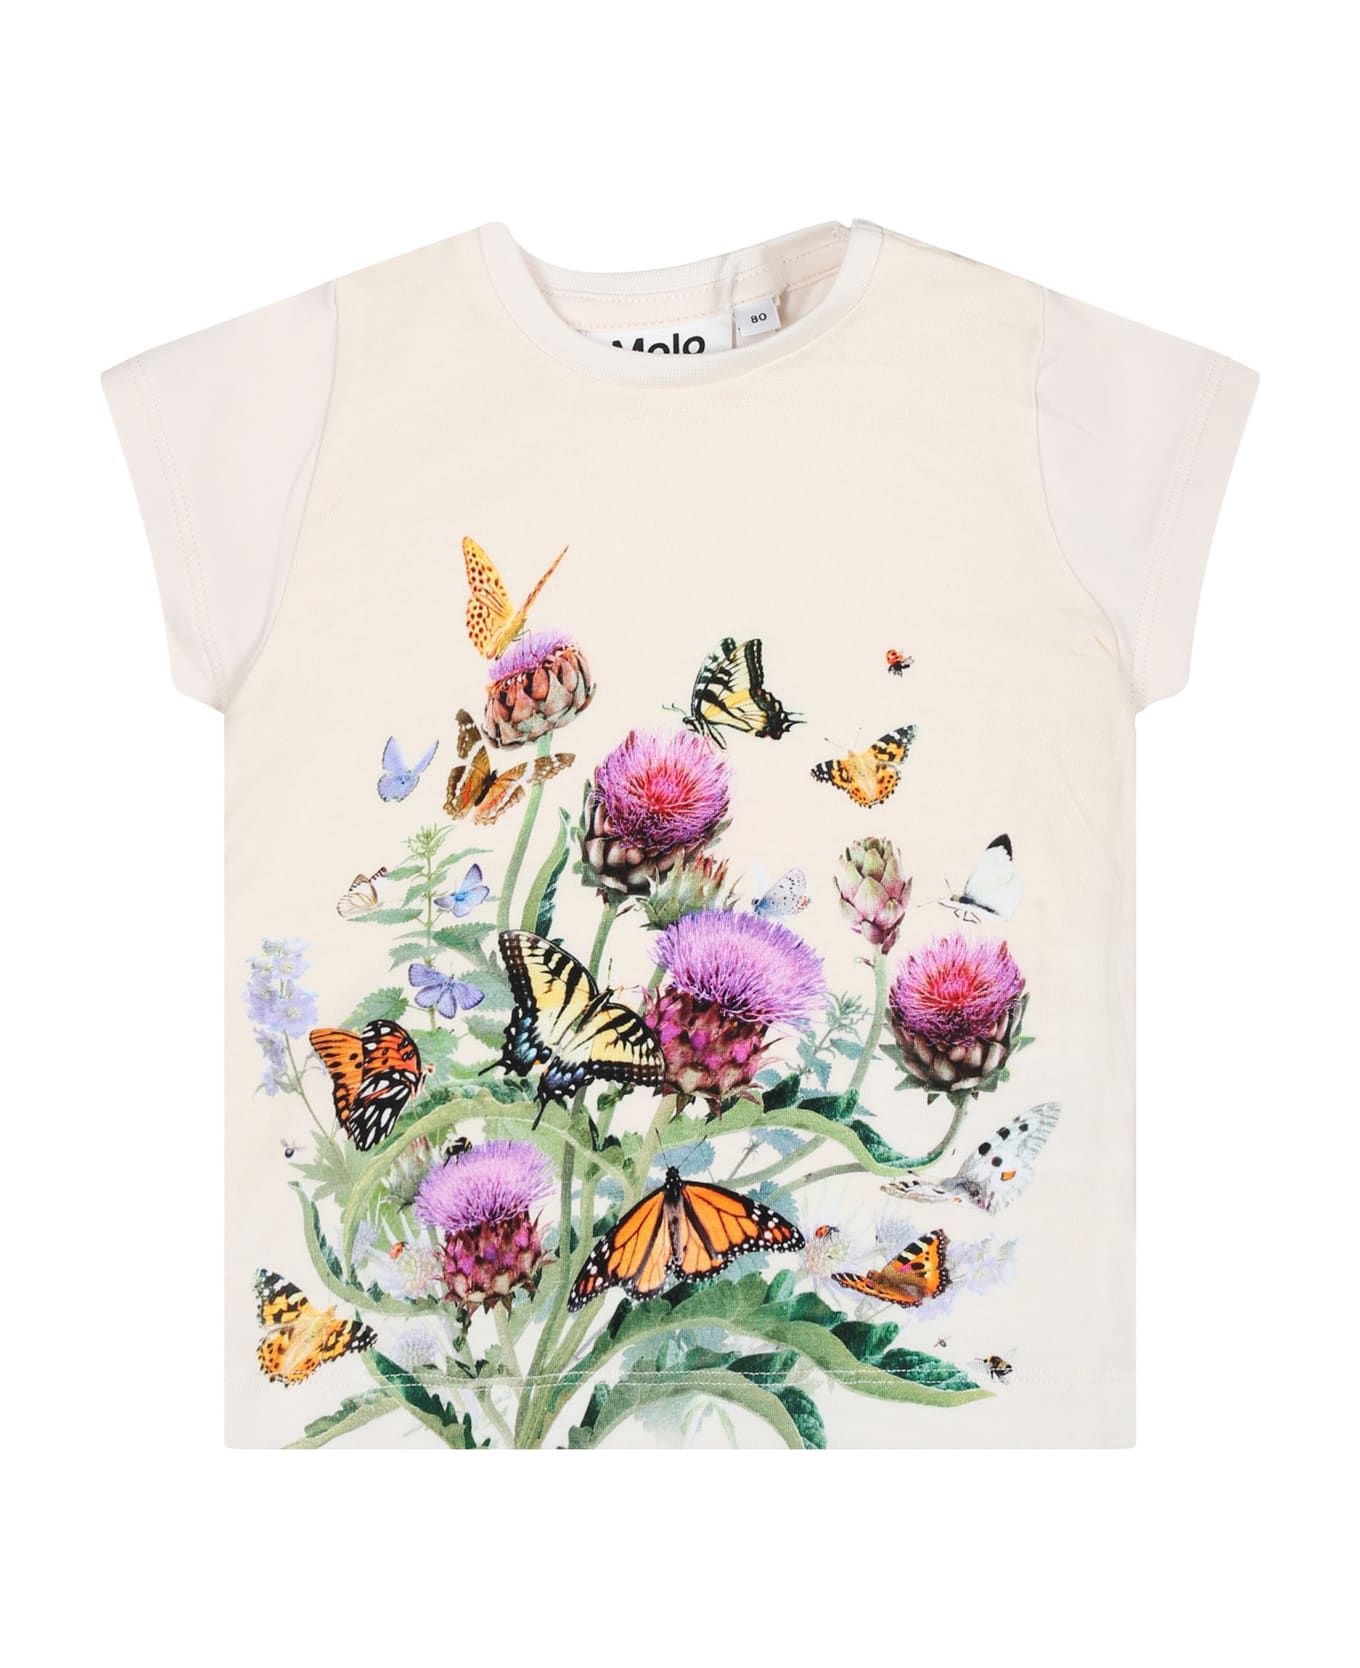 Molo Ivory T-shirt For Baby Girl - Ivory Tシャツ＆ポロシャツ